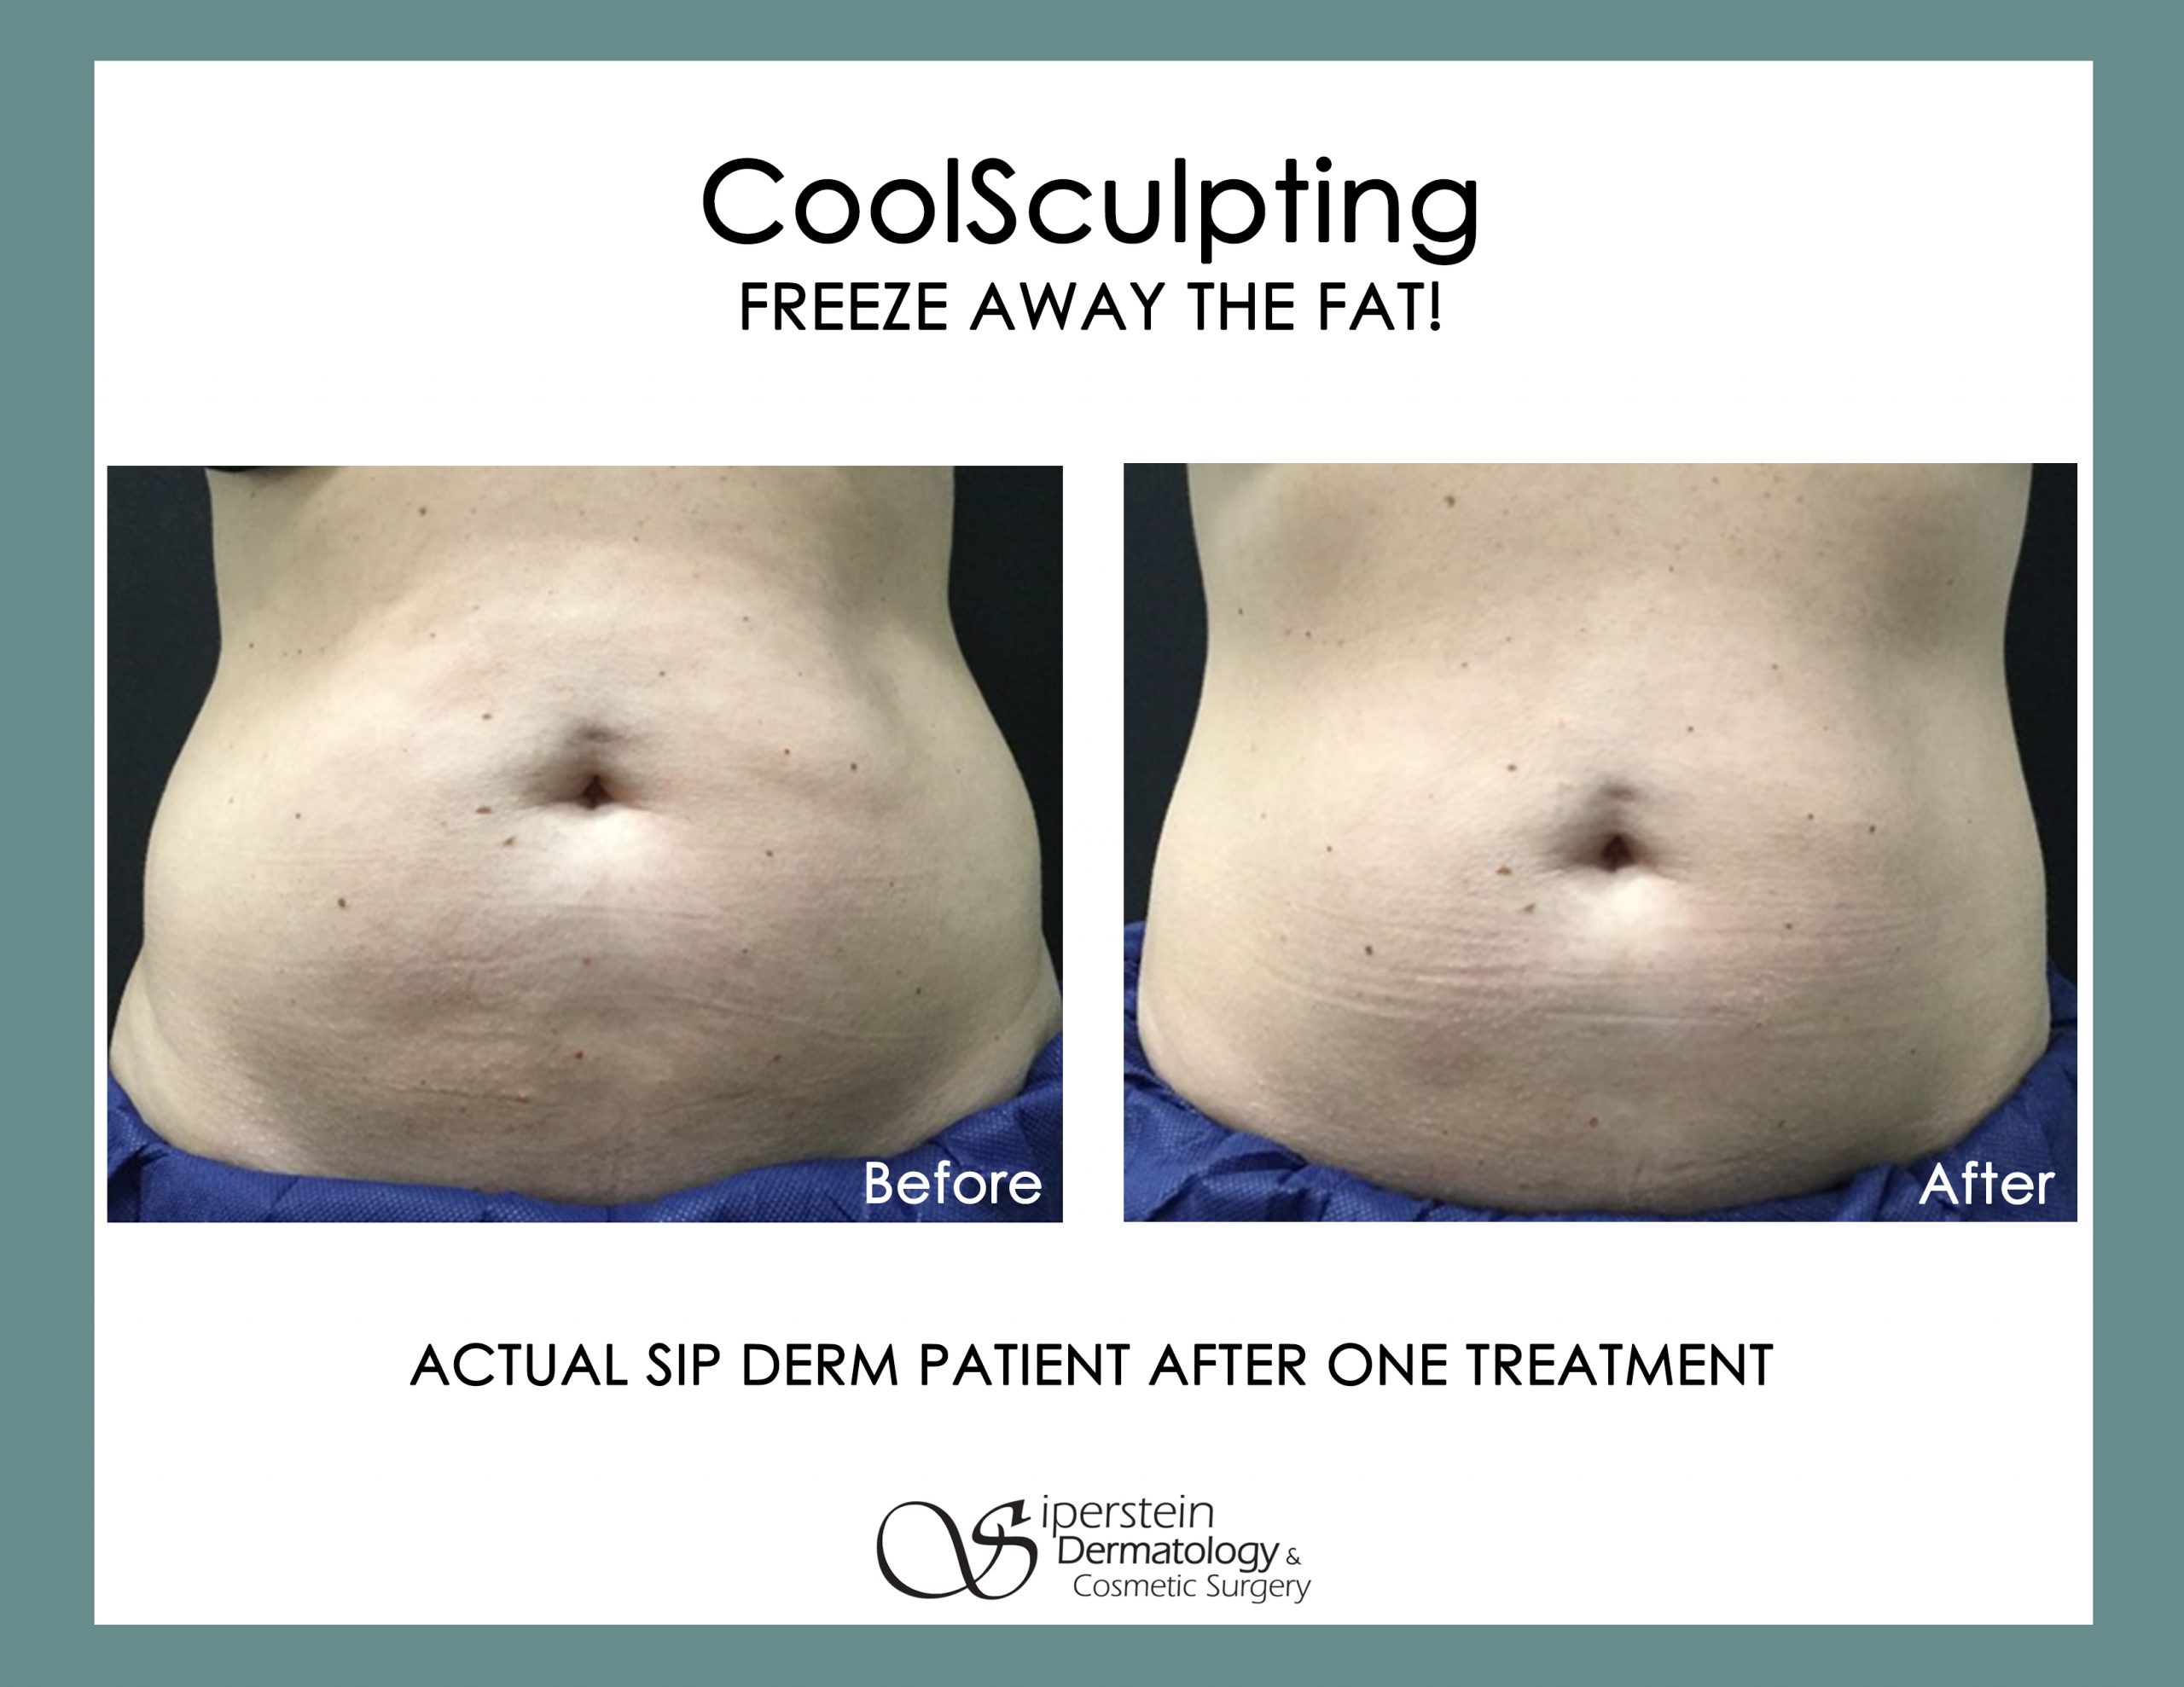 https://www.sipderm.com/wp-content/uploads/2021/04/coolsculpting24rev-1-scaled.jpg